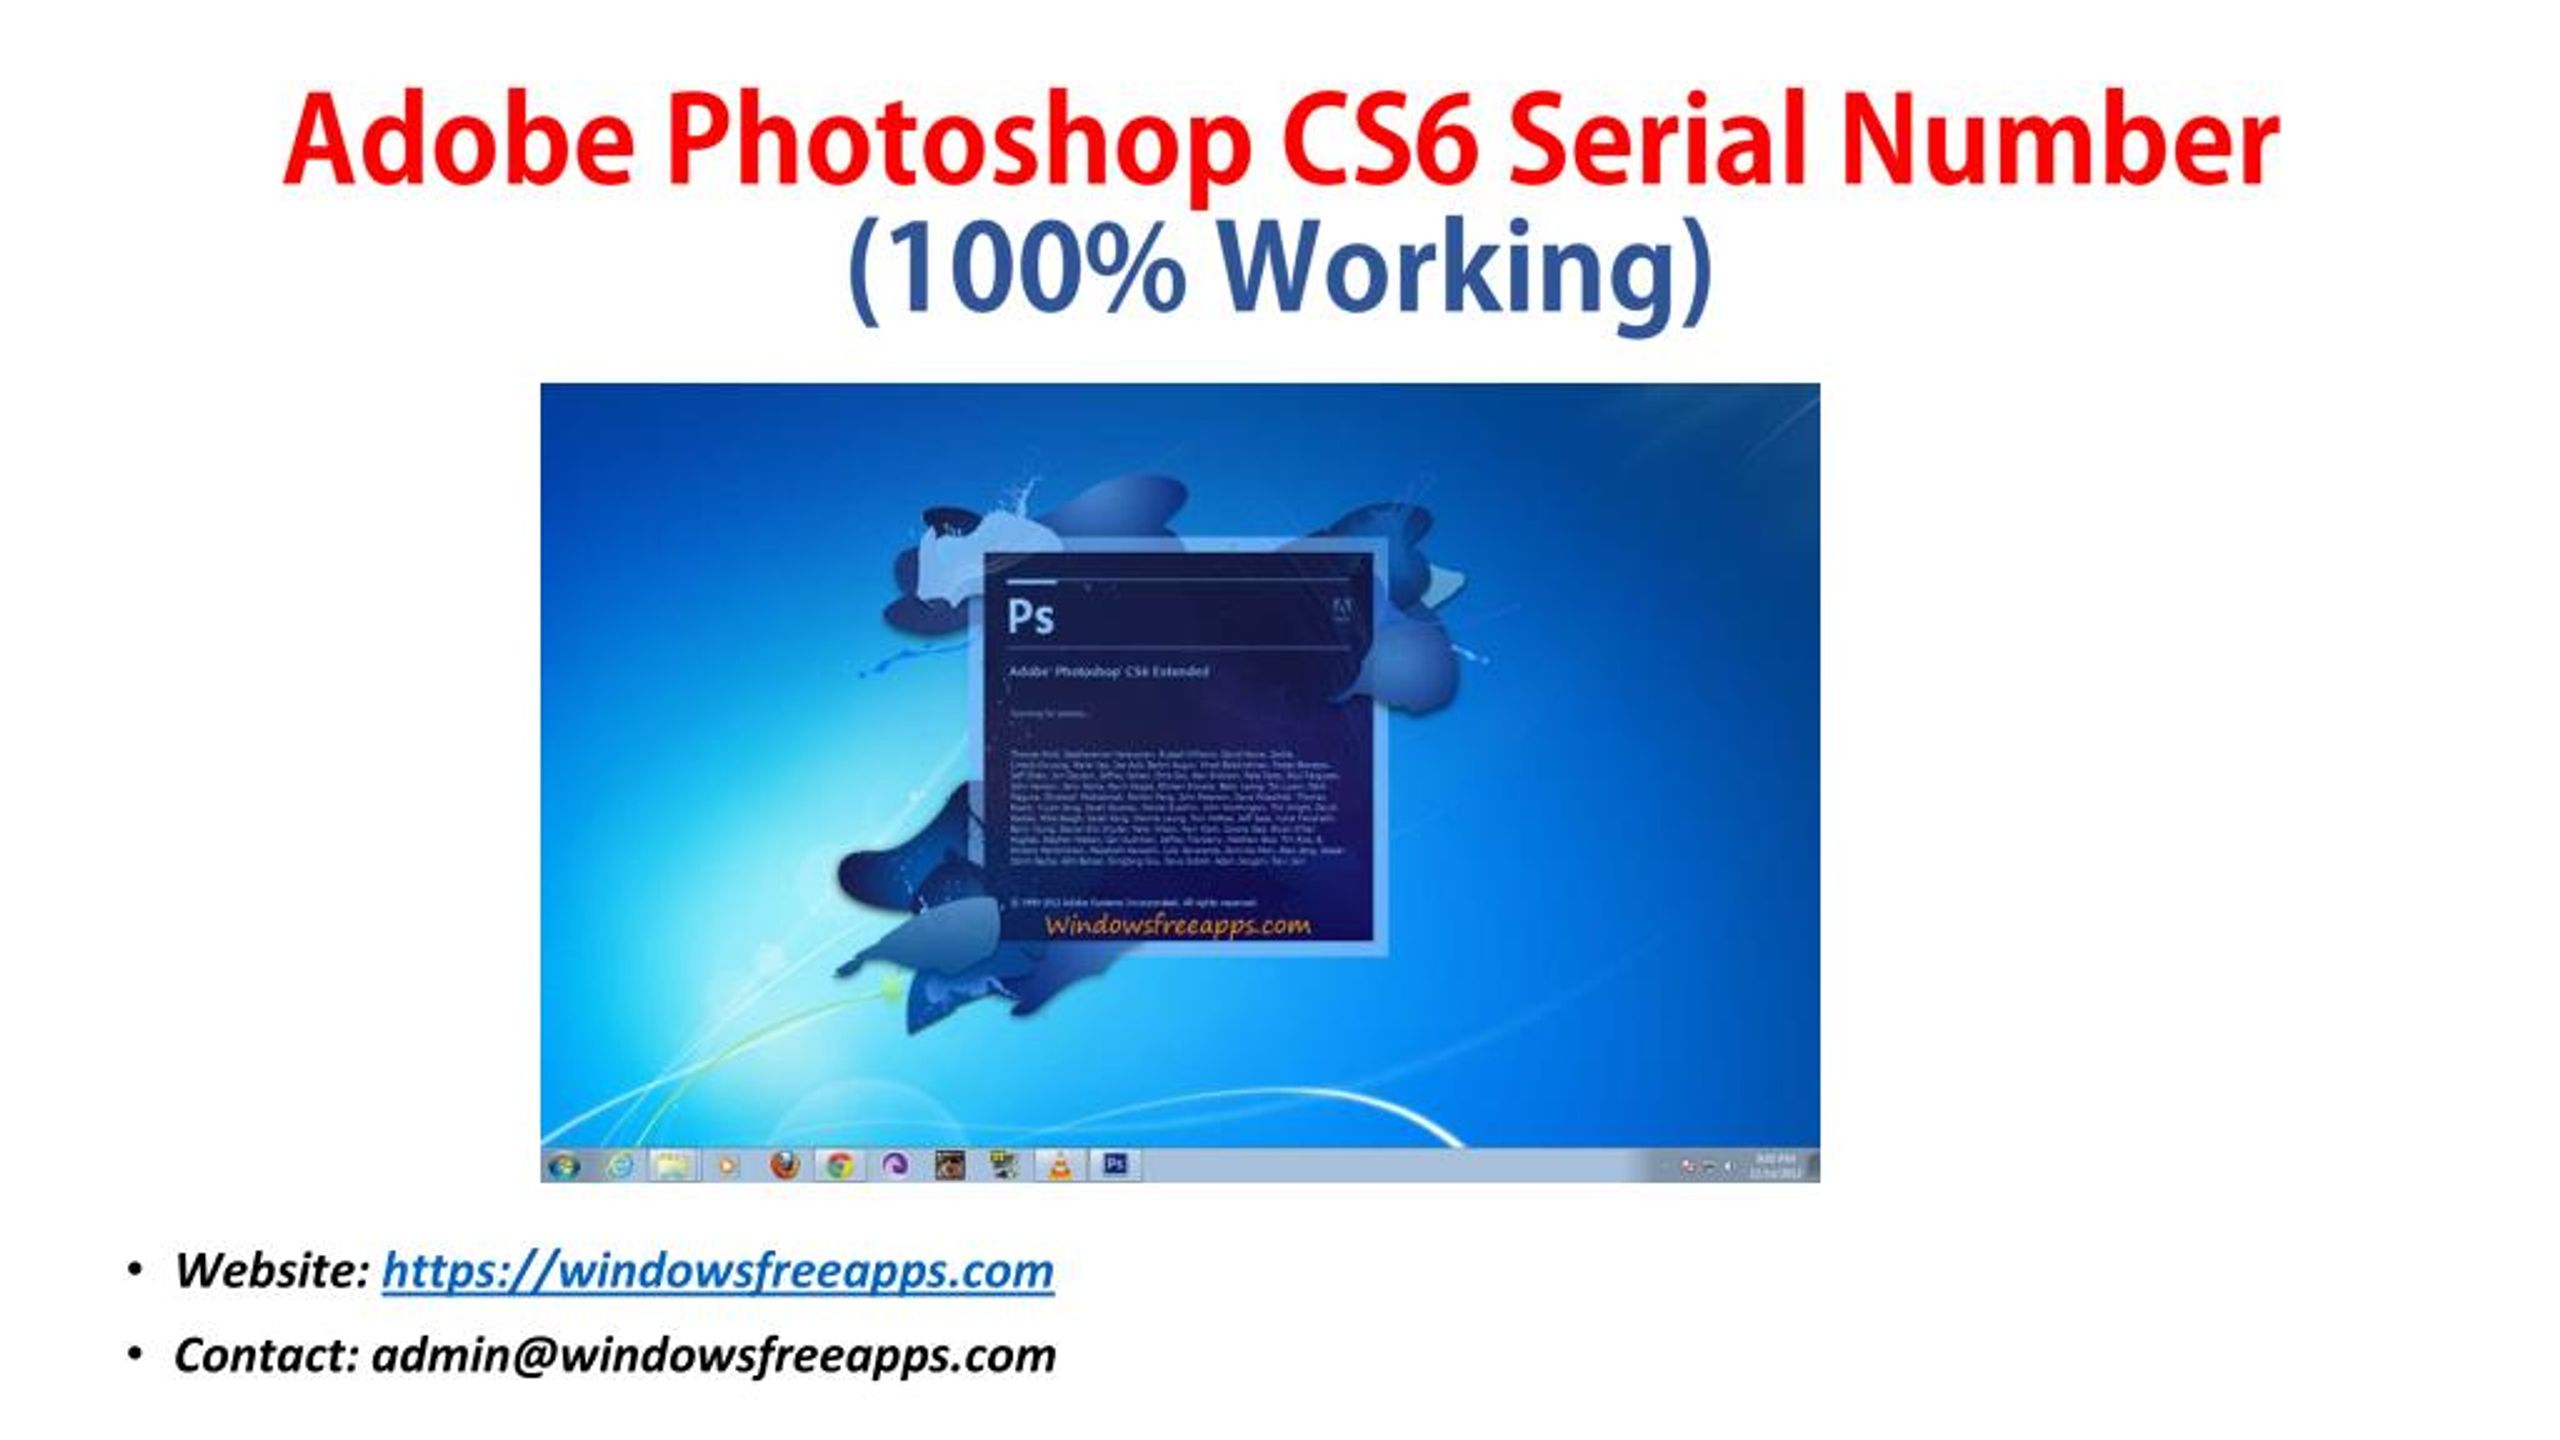 photoshop free download with key